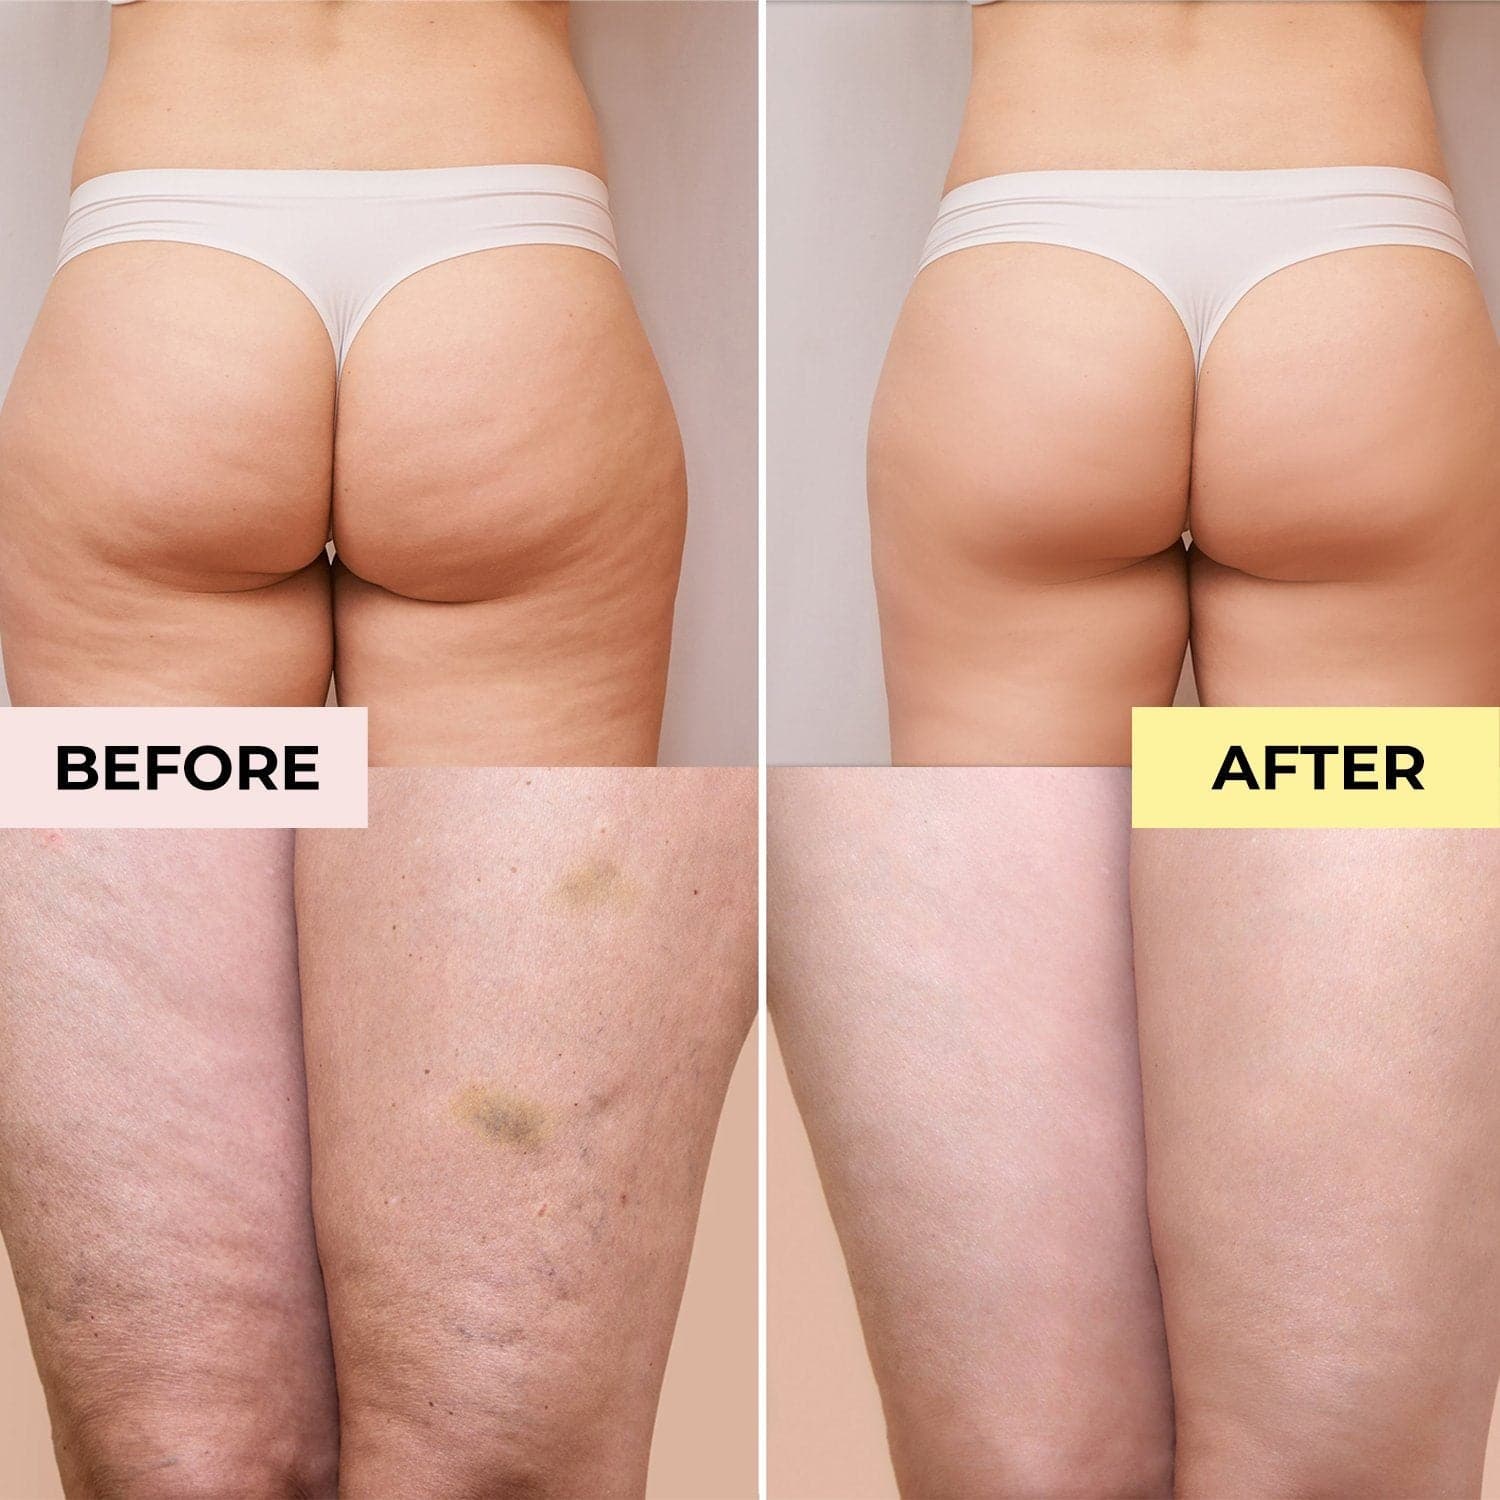 What Is the Best Cellulite Treatment? - Baltimore, MD